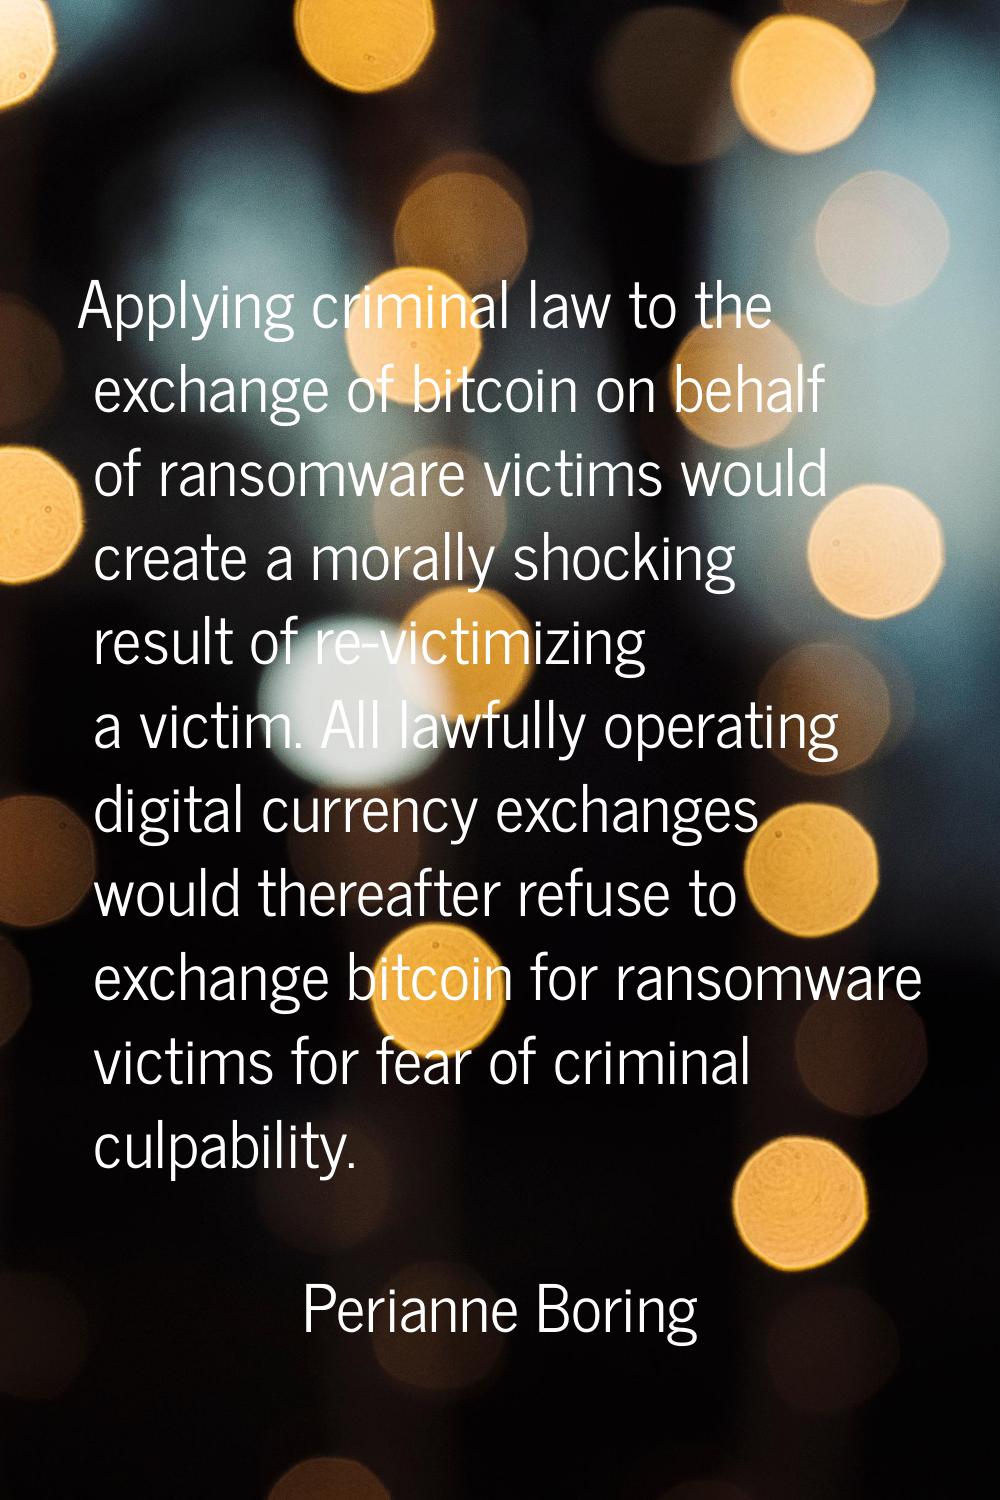 Applying criminal law to the exchange of bitcoin on behalf of ransomware victims would create a mor